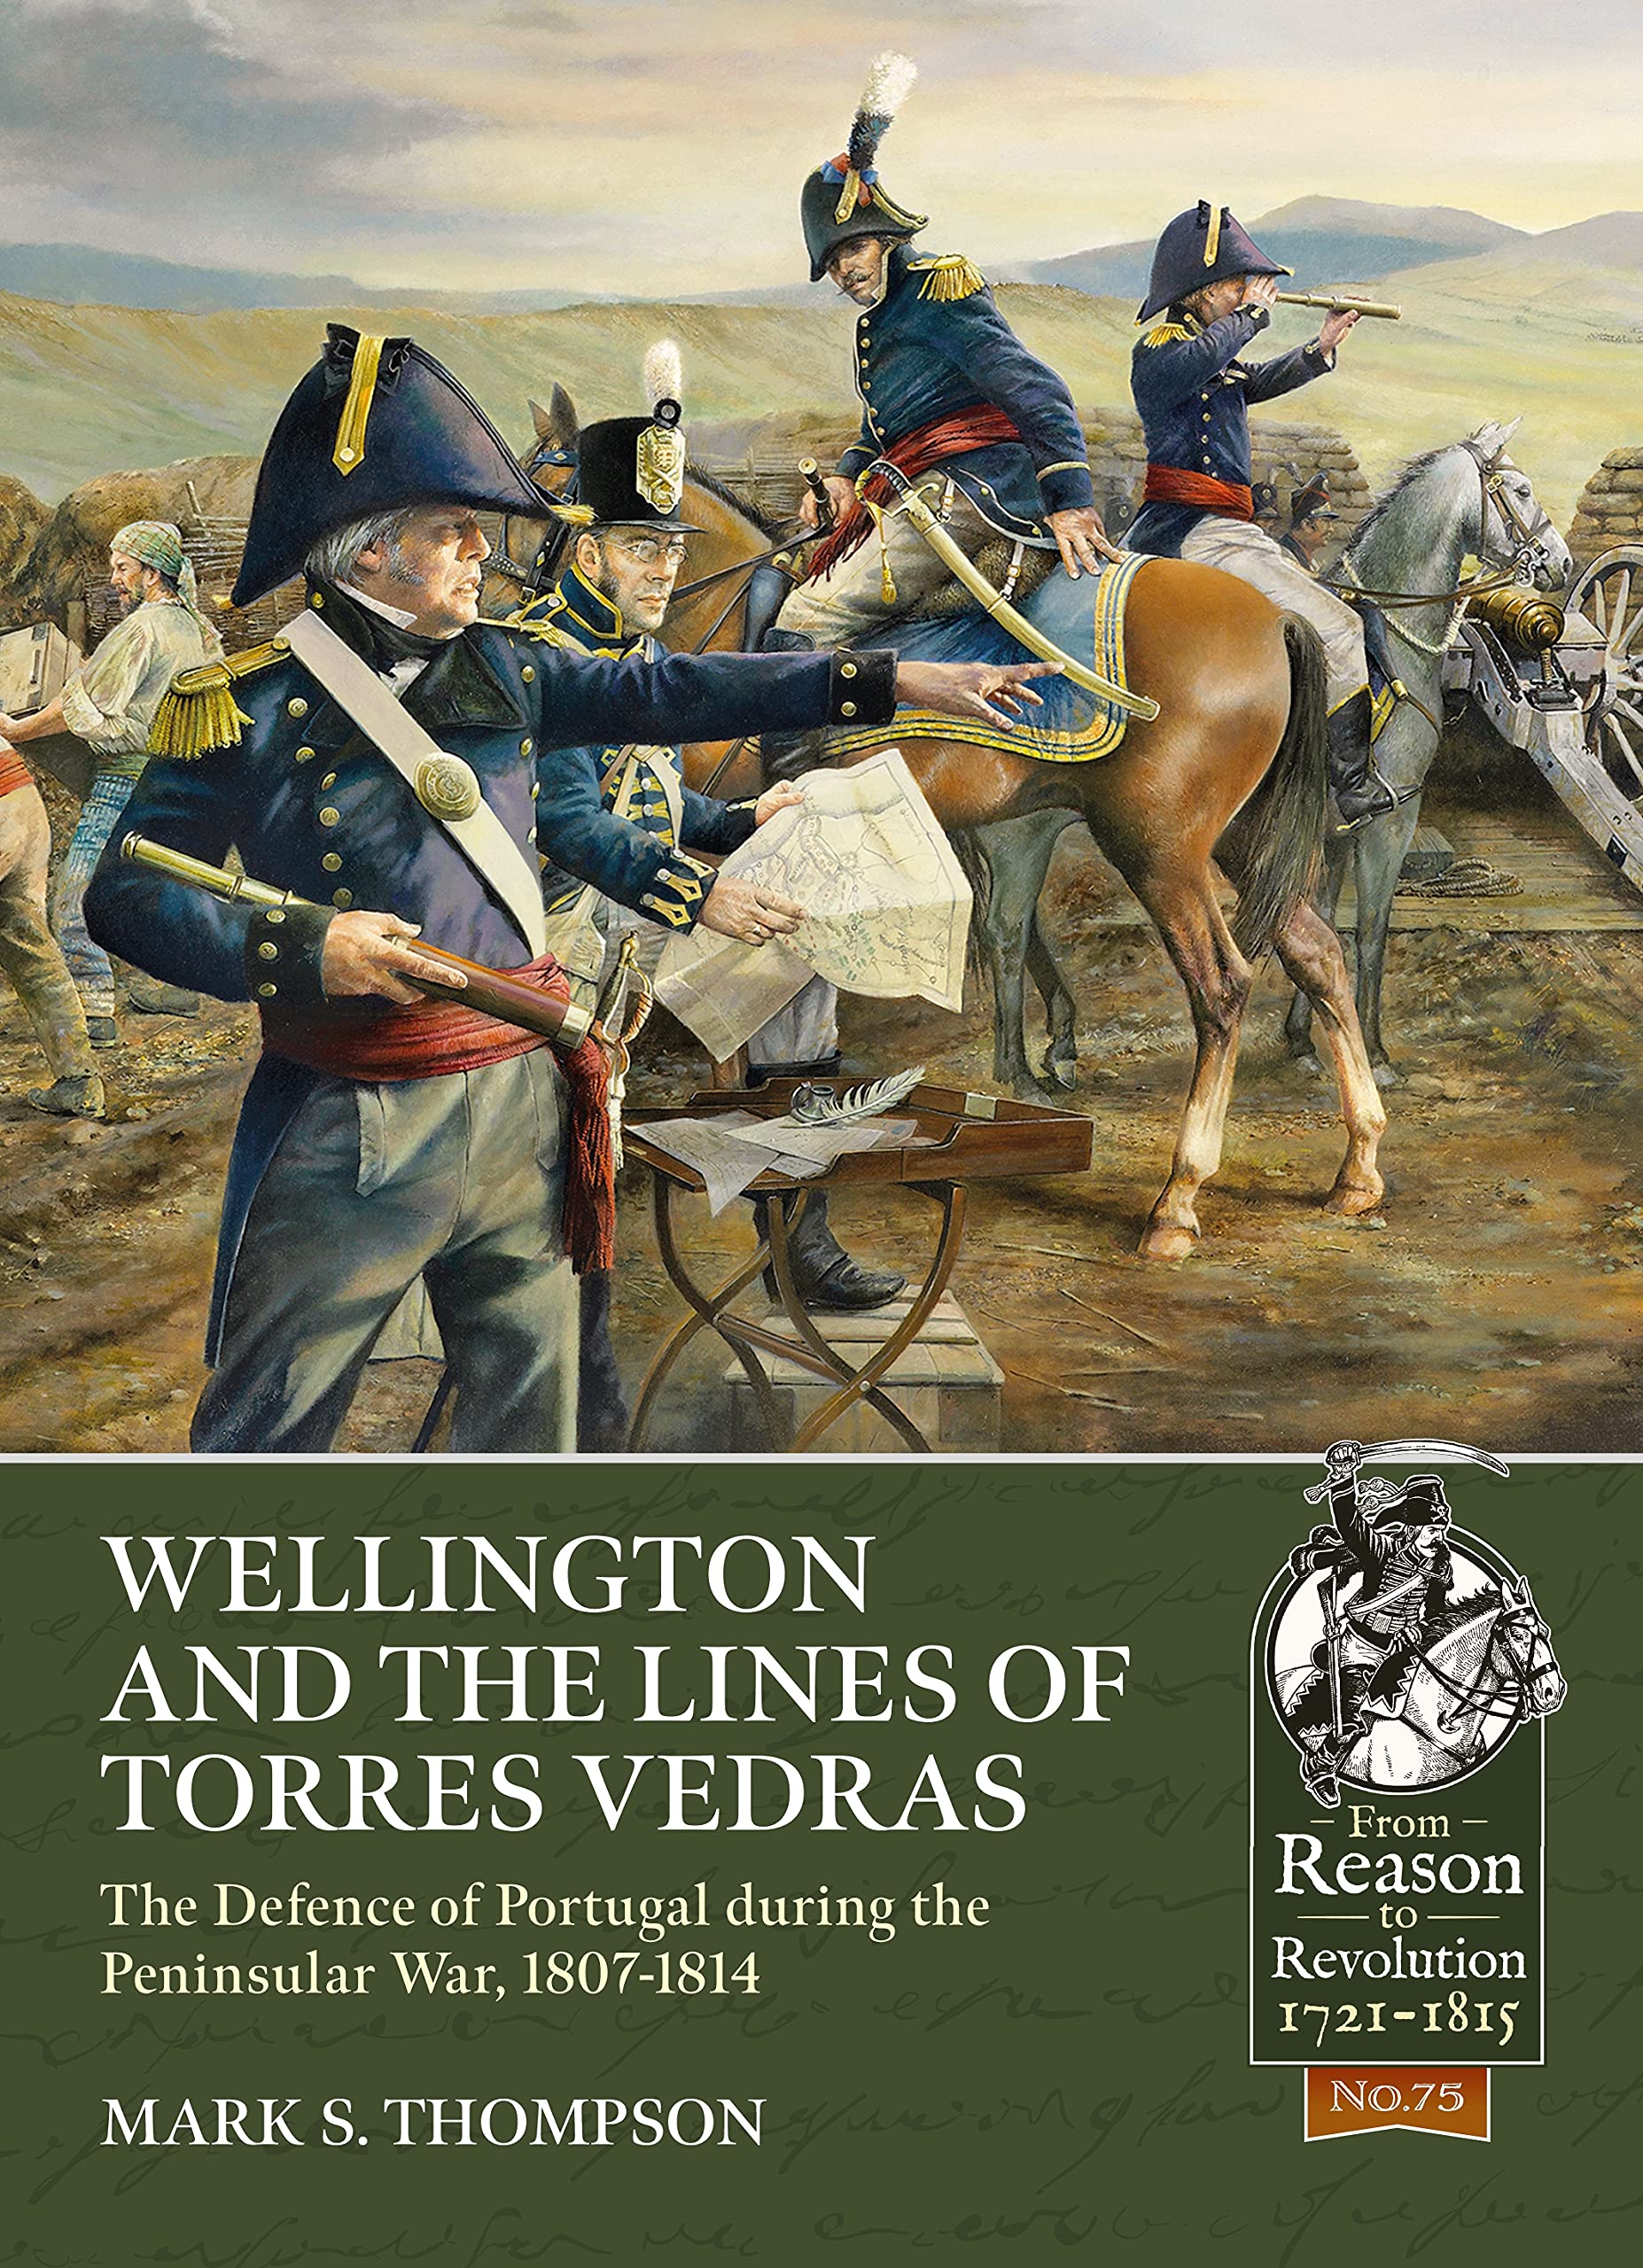 Wellington and the Lines of Torres Vedras